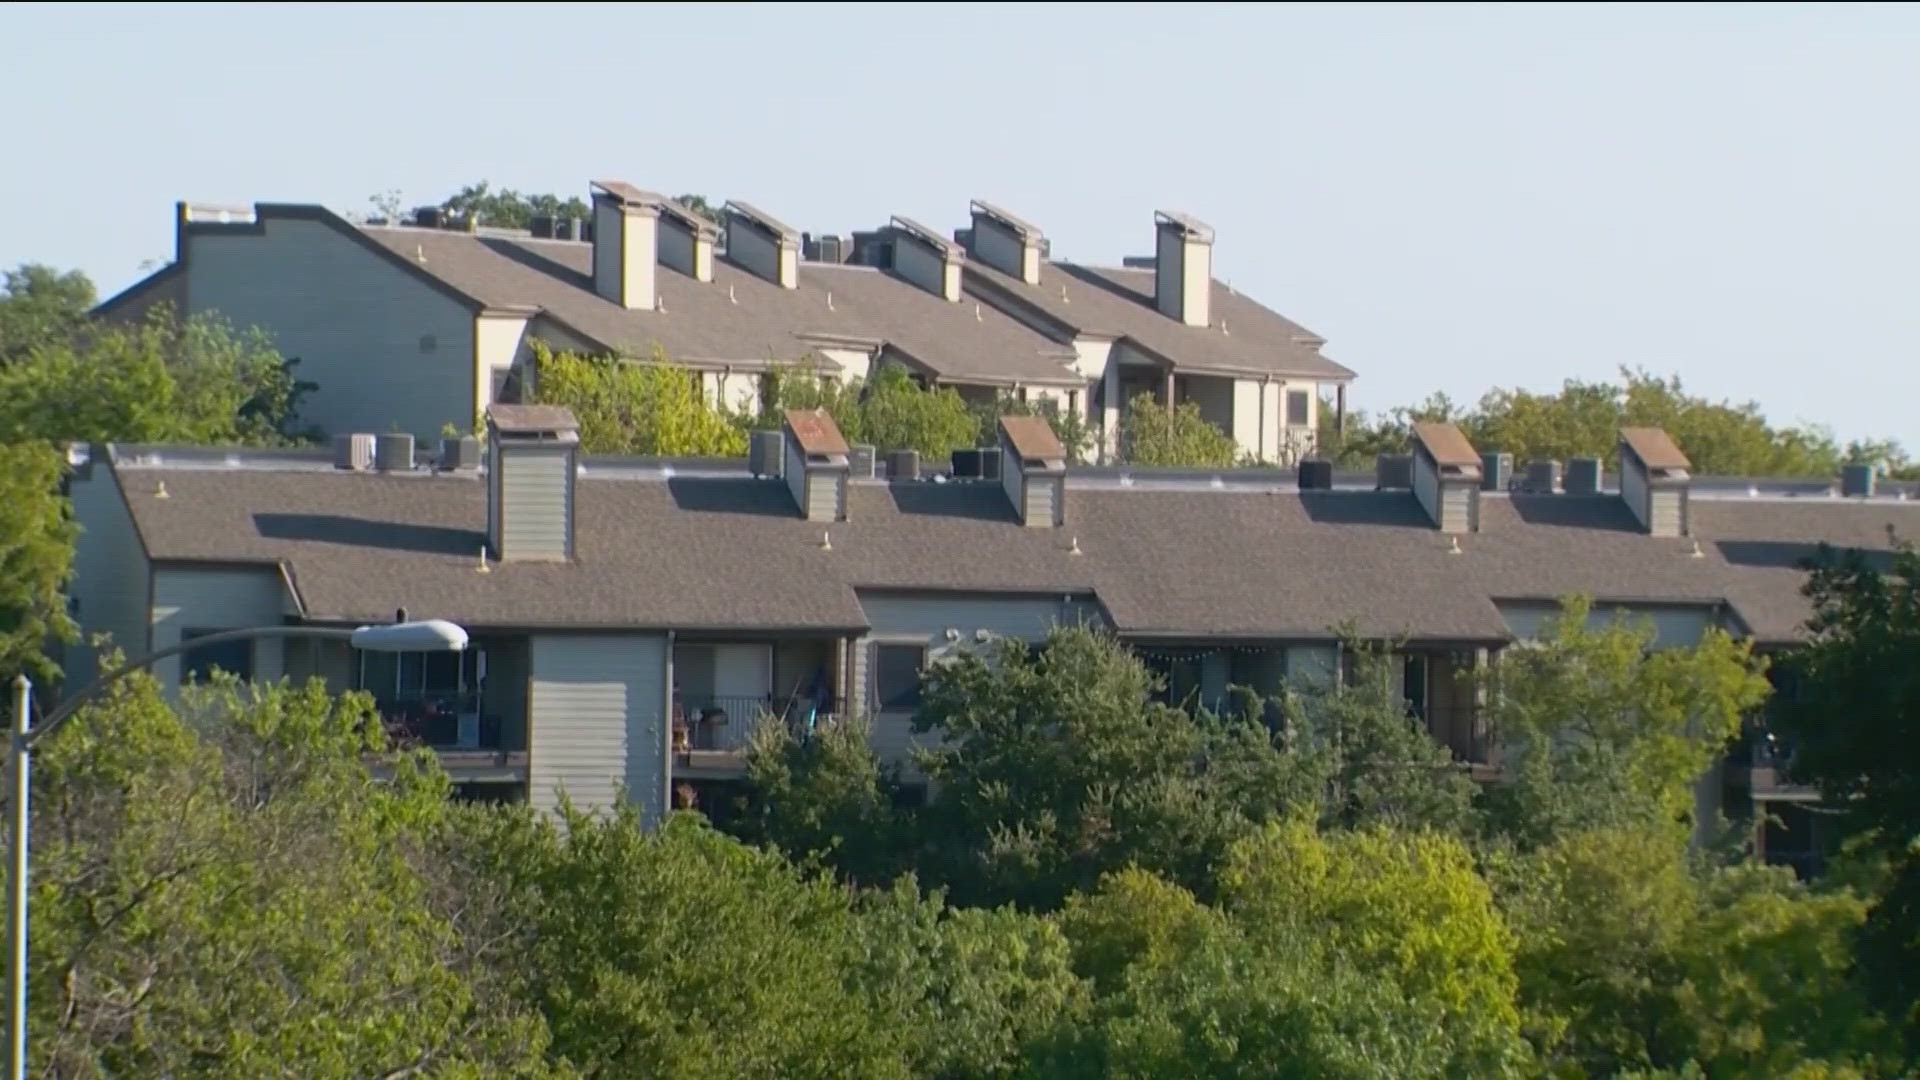 Austin rent prices are finally seeing a trend down. According to a new study by Apartment List, the rent market growth is falling.